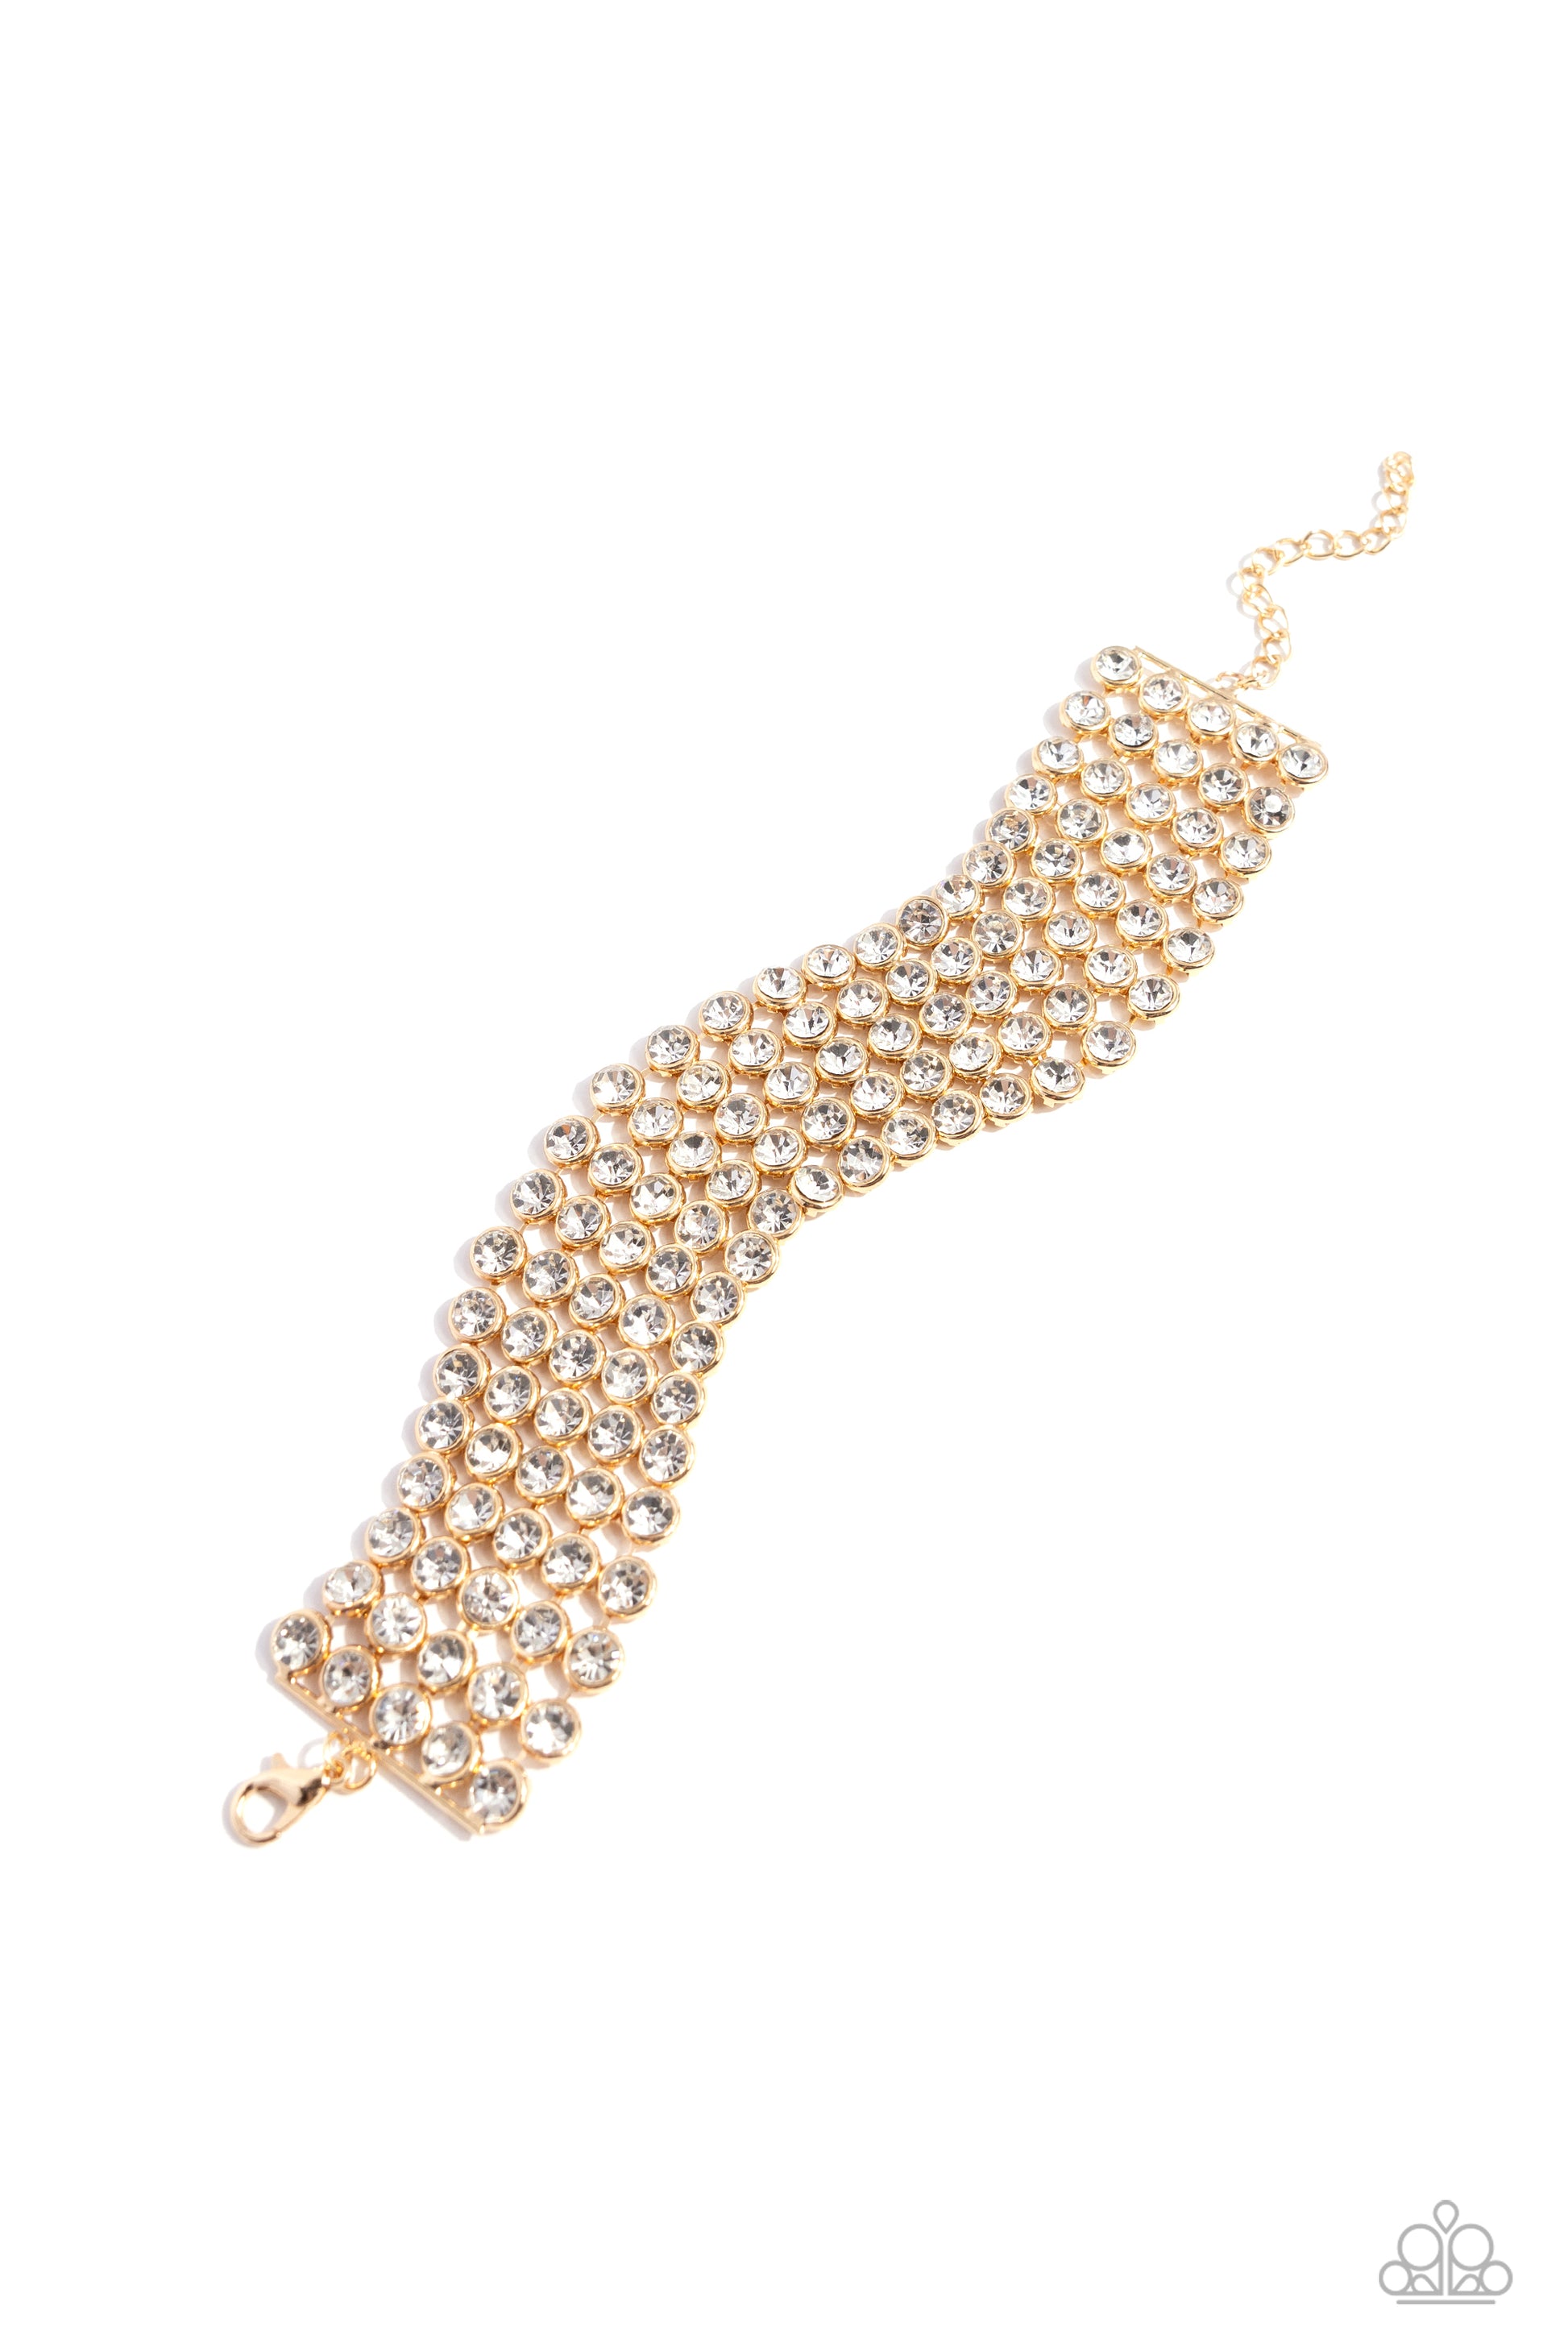 Paparazzi Accessories - GLASSY Gallery - Gold Bracelets suspended from sleek, dainty gold bars, five linked rows of glassy white rhinestones stack into a blinding display around the wrist for a jaw-dropping look. Features an adjustable clasp closure.  Sold as one individual bracelet.